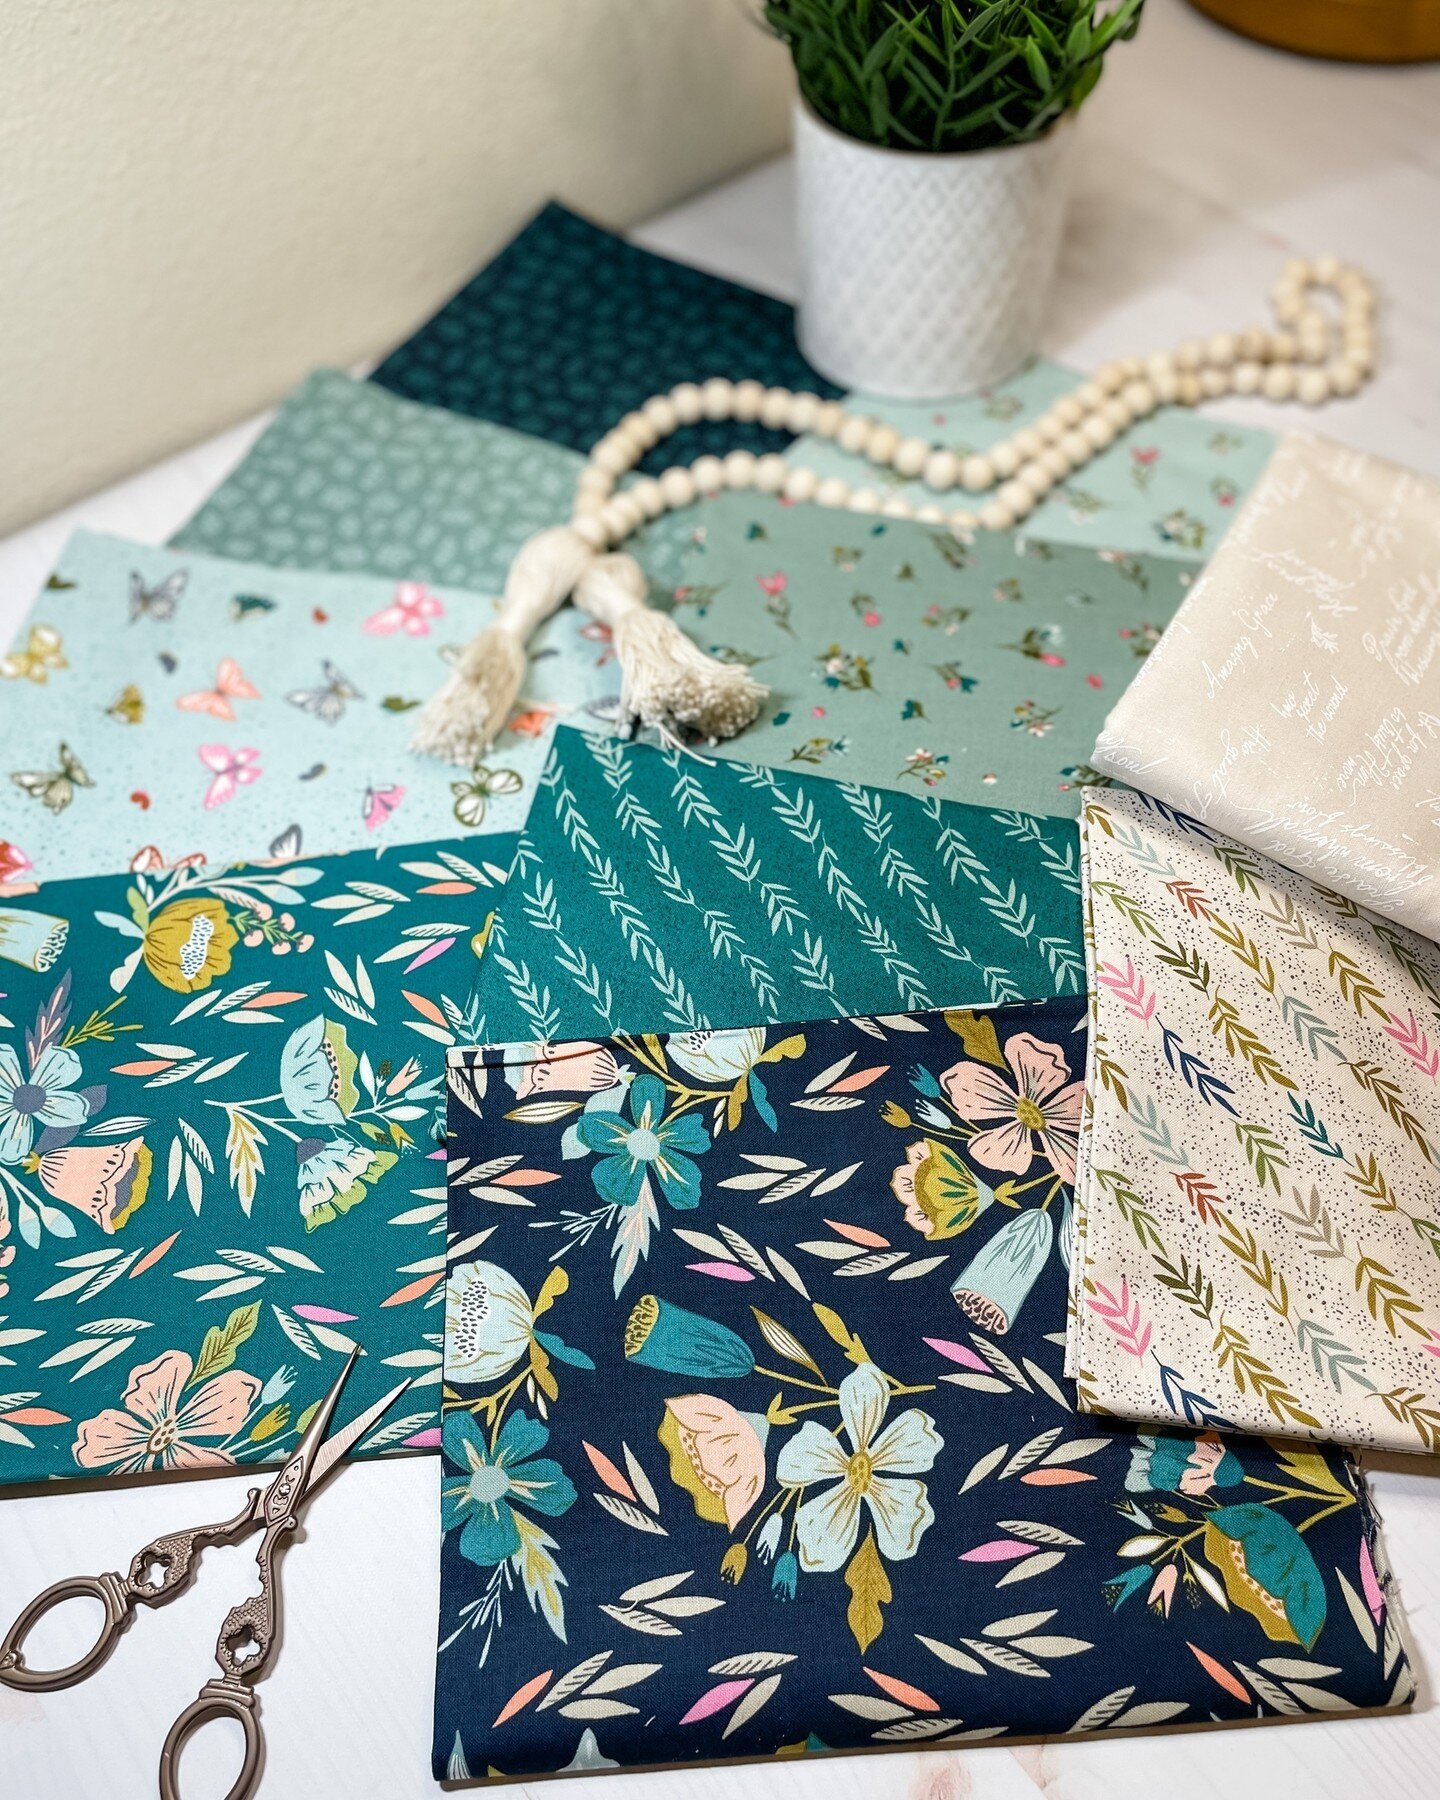 I&rsquo;ve got some really fun things in the works for early this summer, and this @modafabrics #songbookanewpagefabruc by @fancythatdesignhpise in my faaaaavorriiittte kinds of colors is going to help make part of it so special!! 

My go-to fabric s